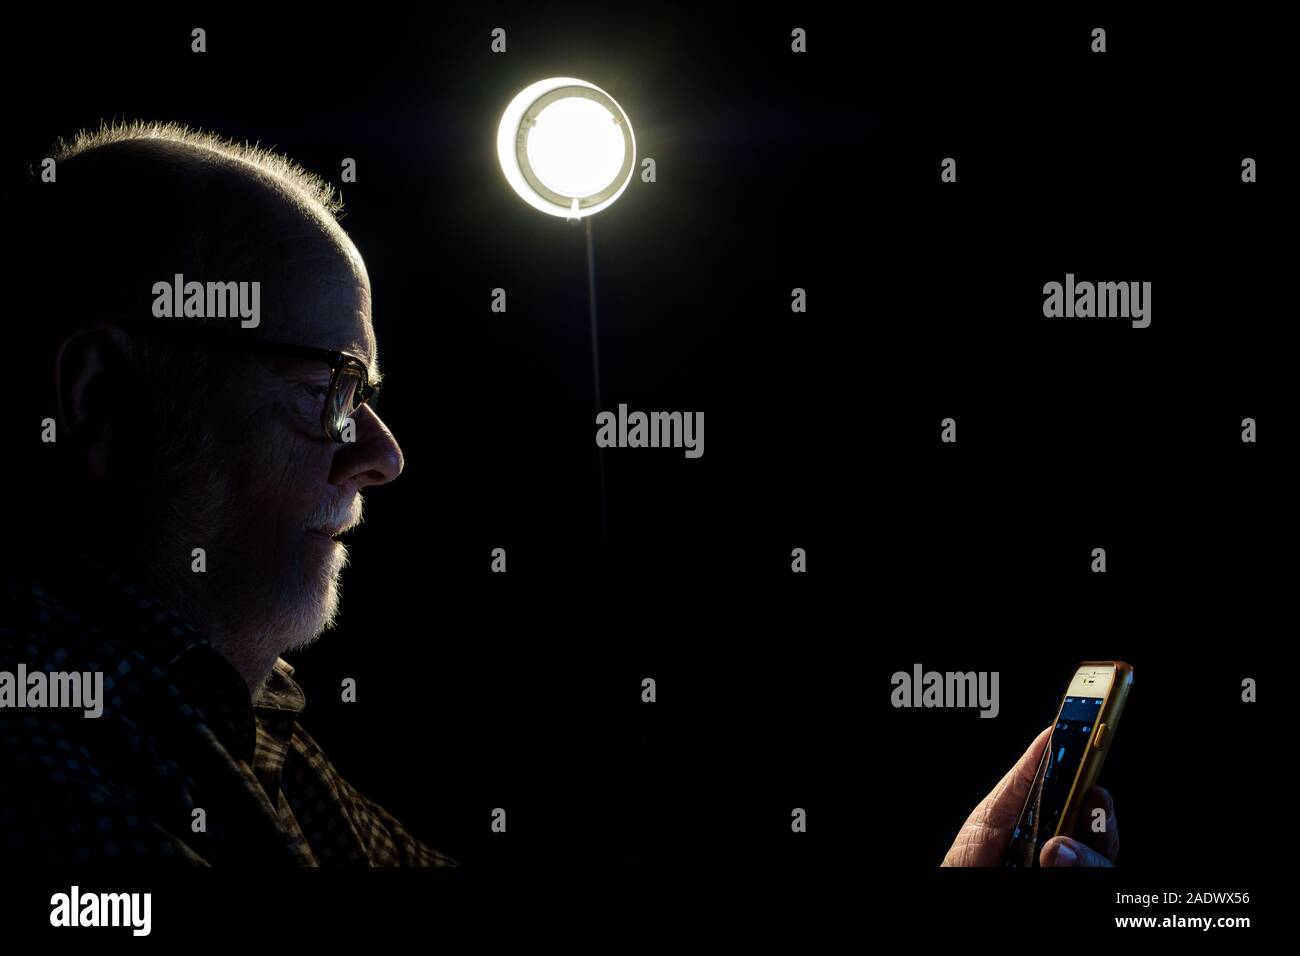 A man with a smartphone sitting under a bright light. Stock Photo